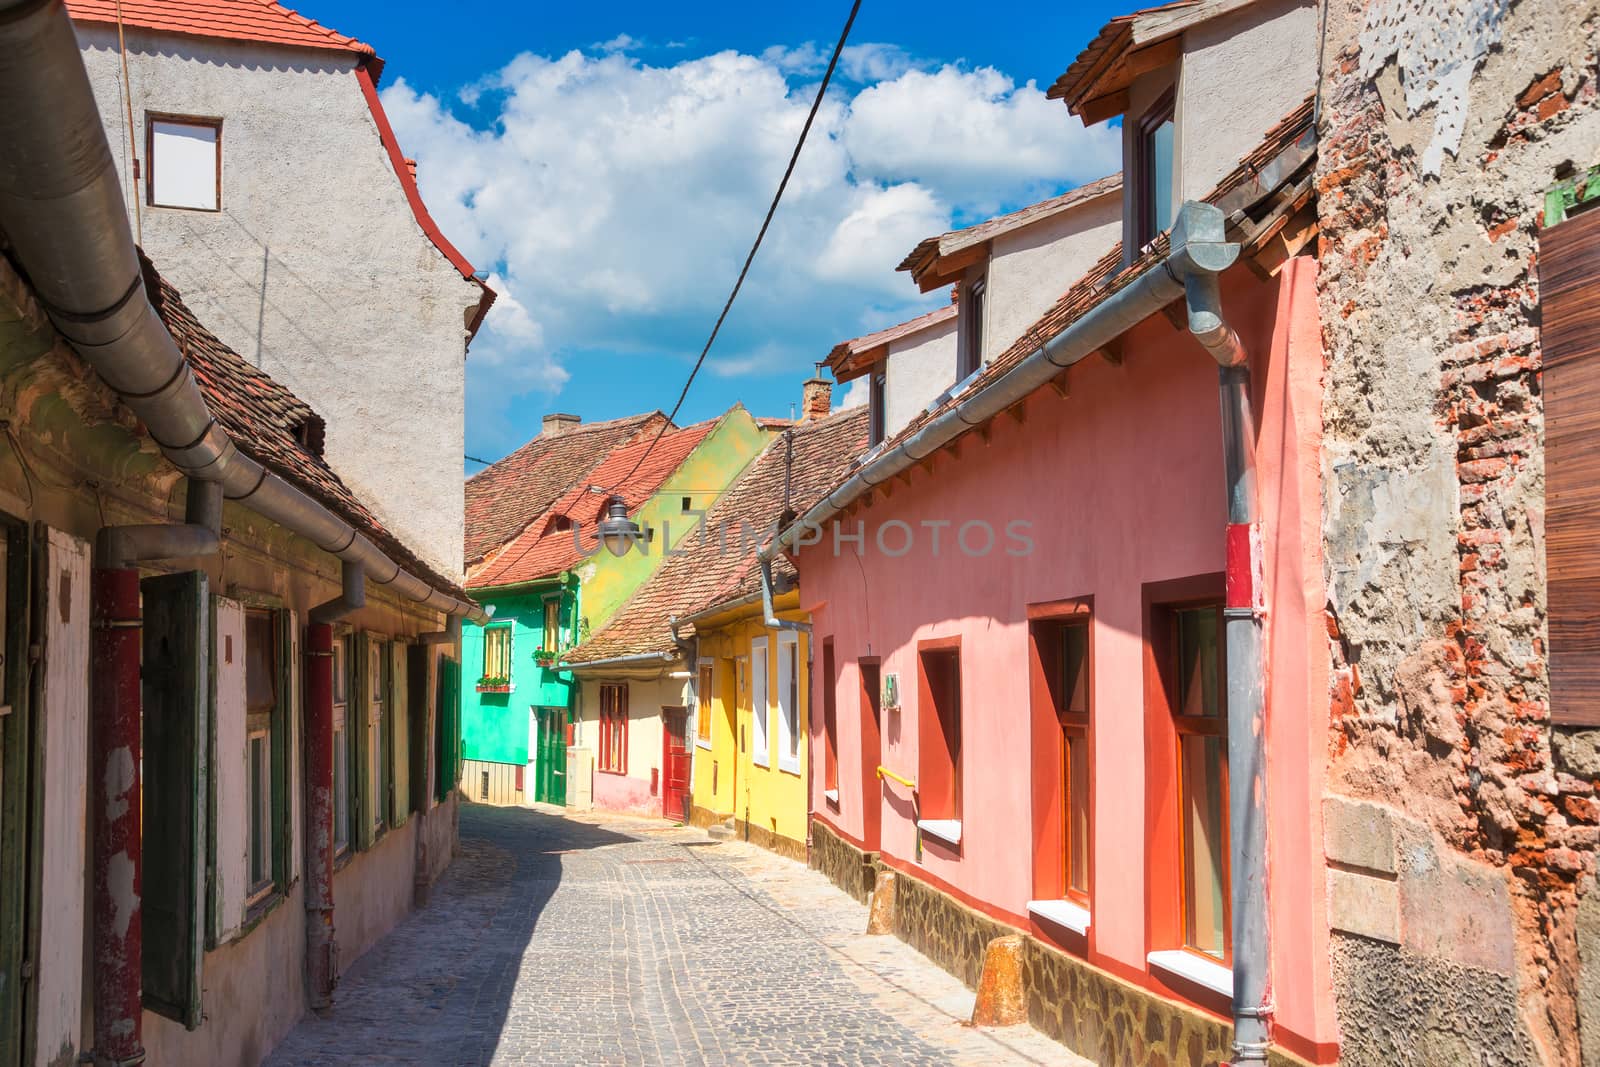 Sibiu is a city in the heart of Romania. It was the capital of Transylvania in the antiquities.